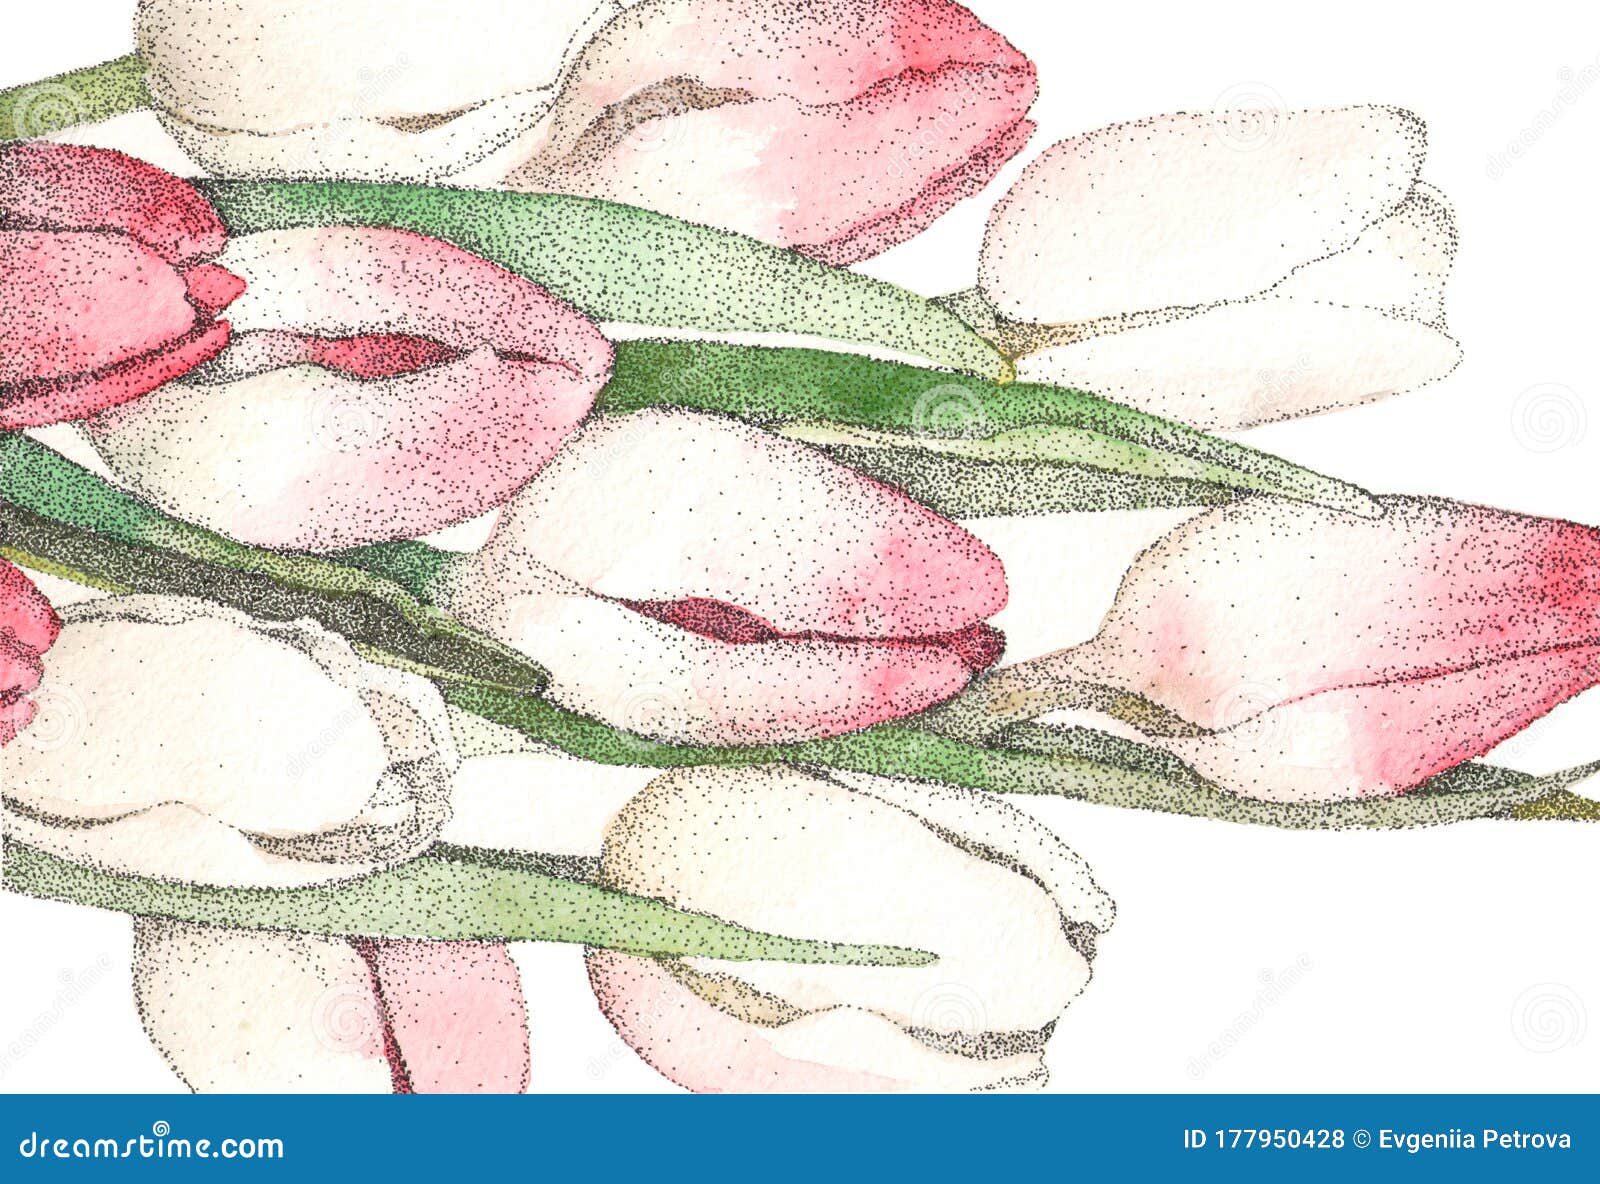 Watercolor Illustration Of Tulips In Pointillism Style Romantic